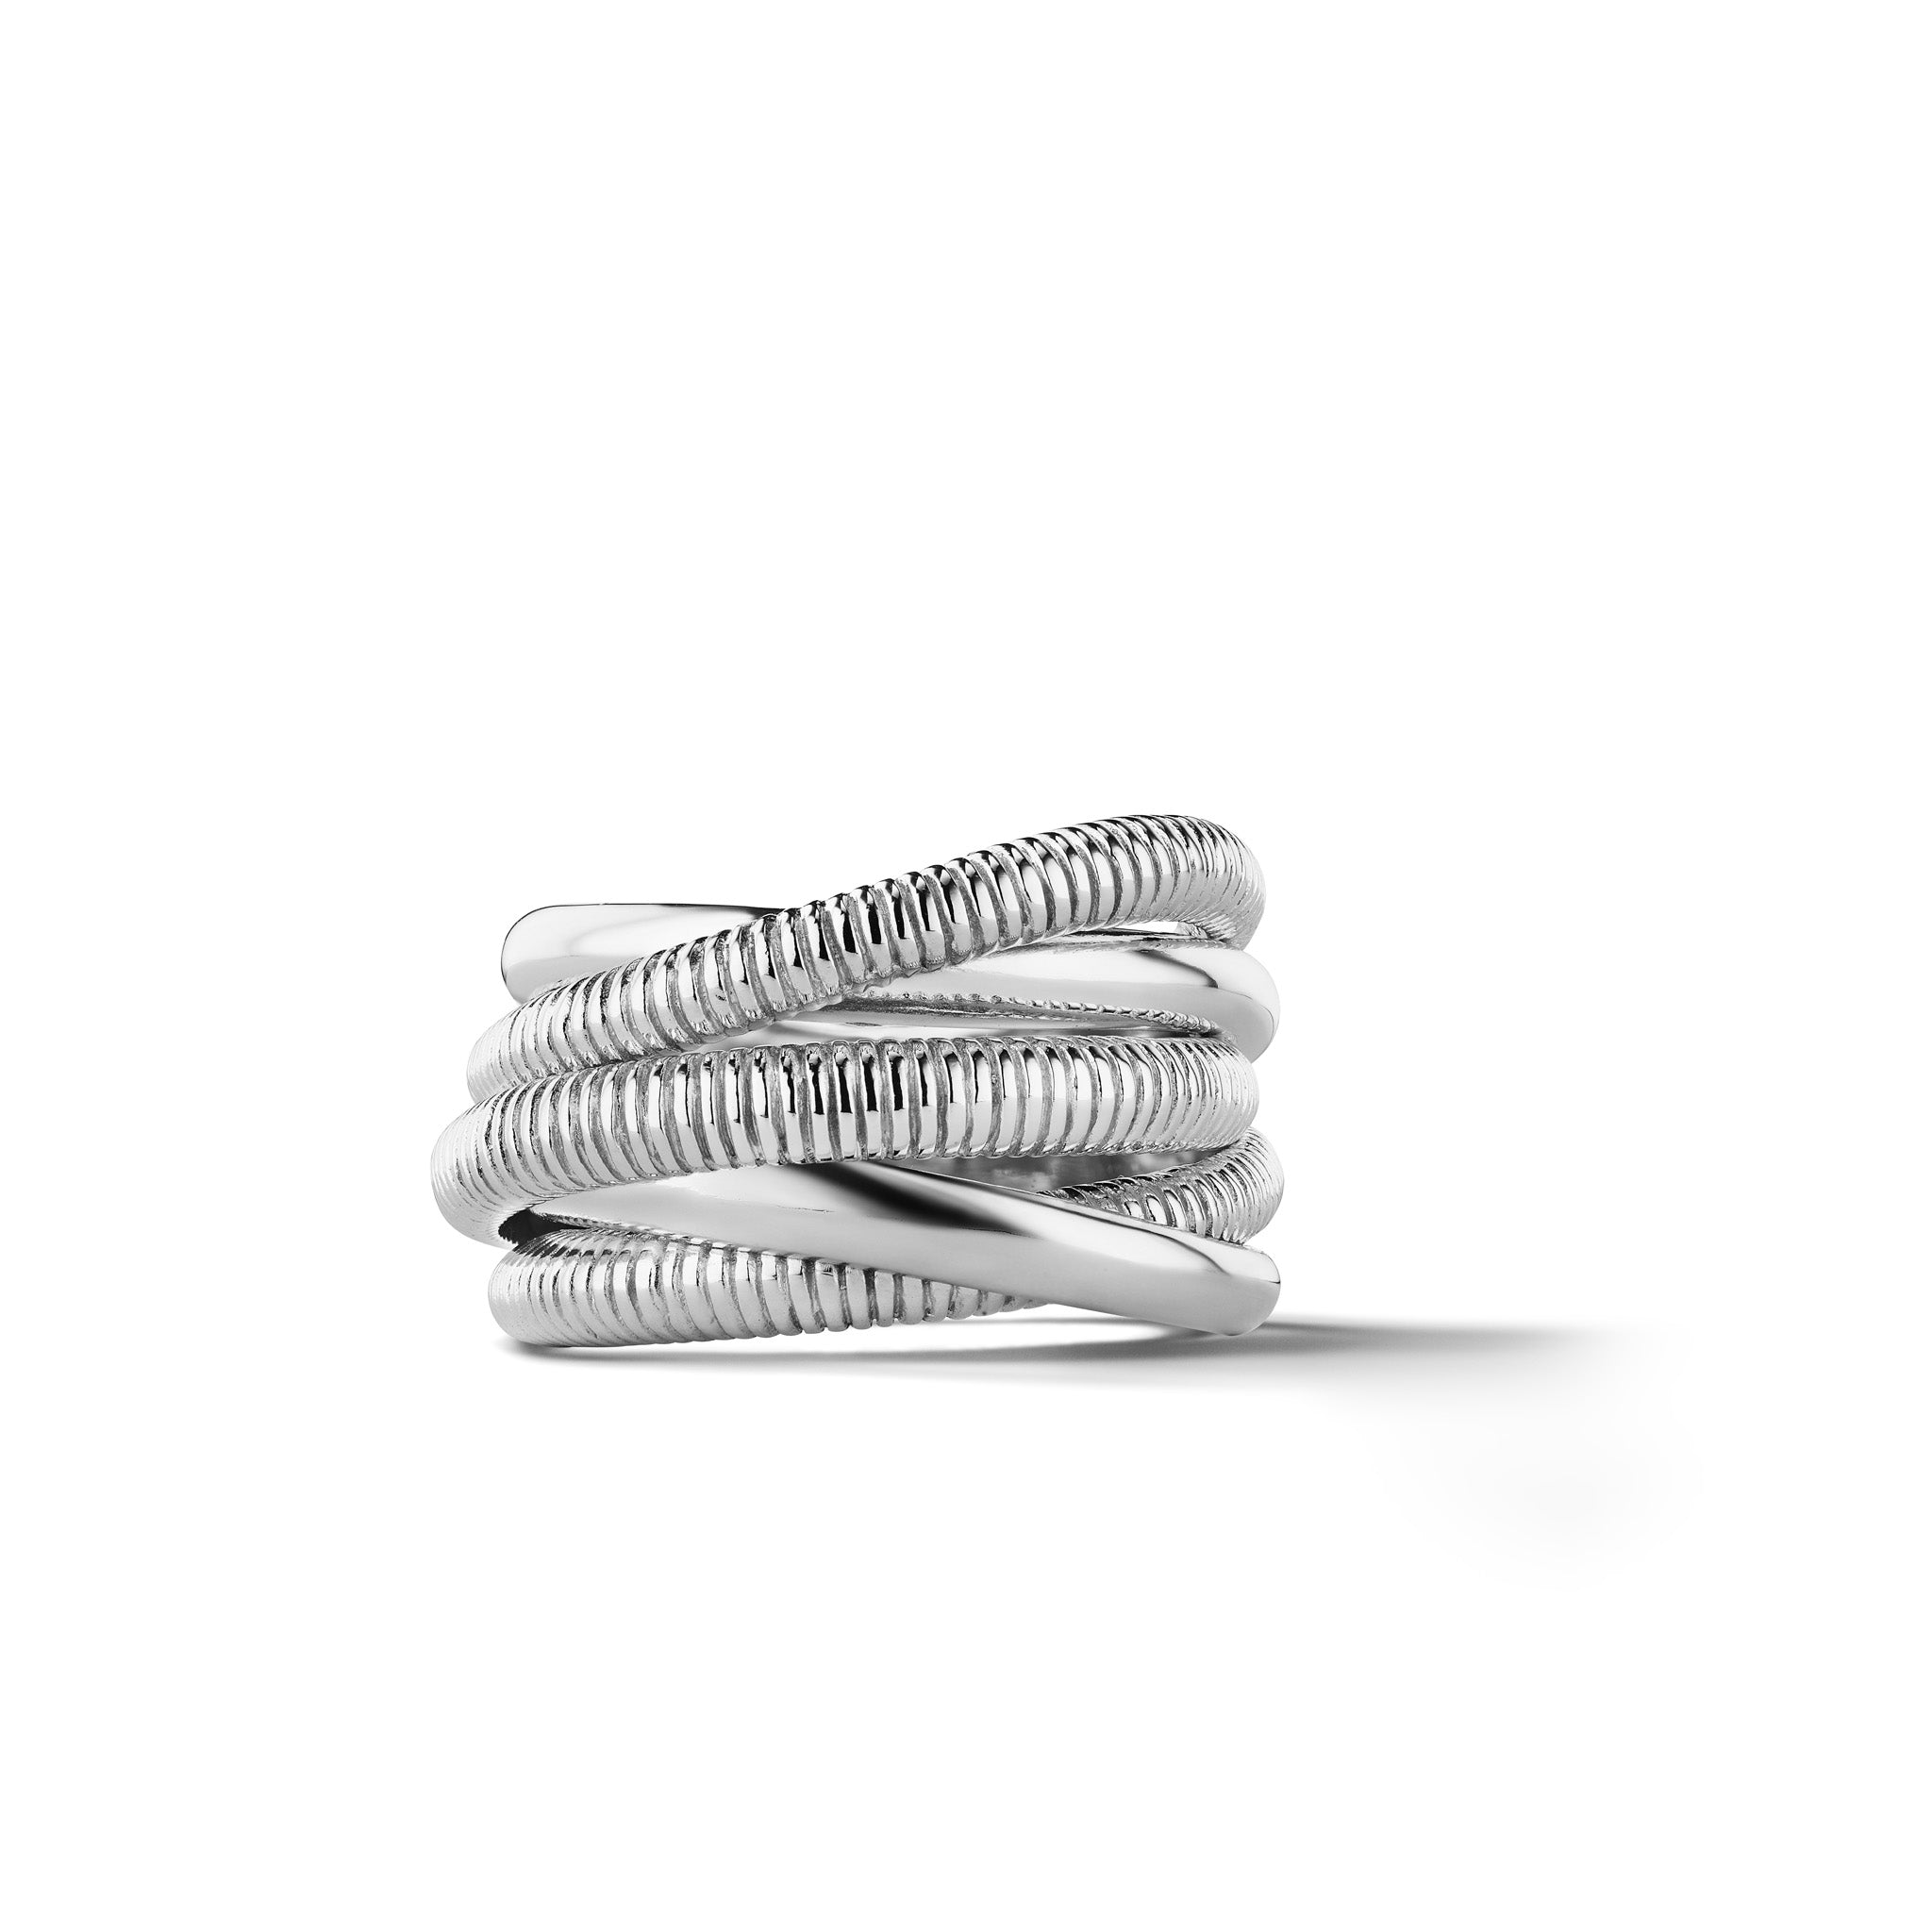 Eternity Five Band Highway Ring